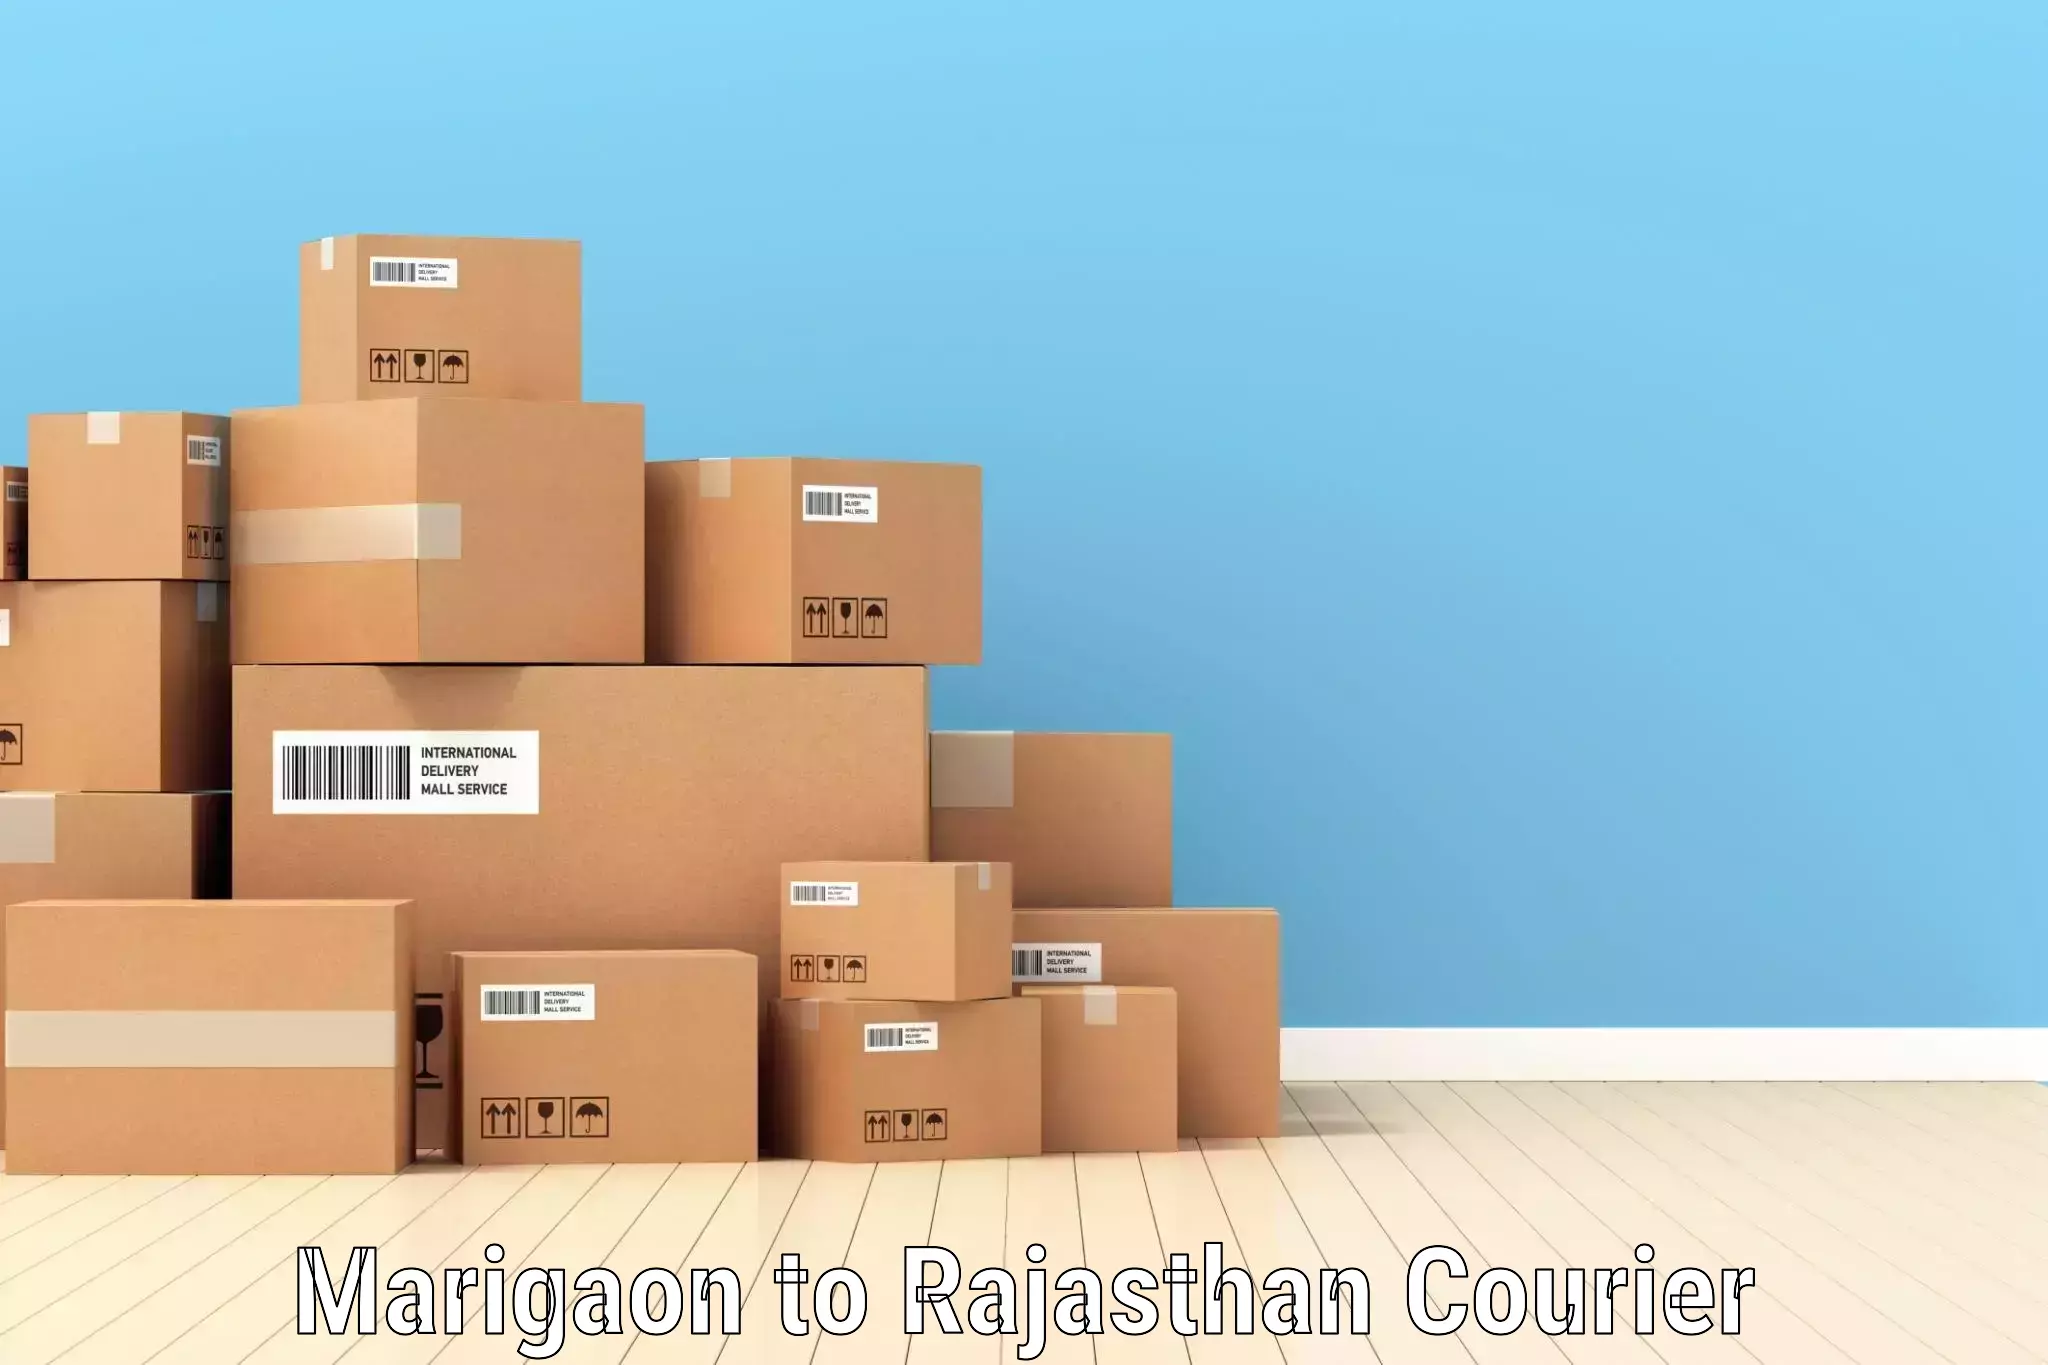 Customer-centric shipping in Marigaon to Lalsot